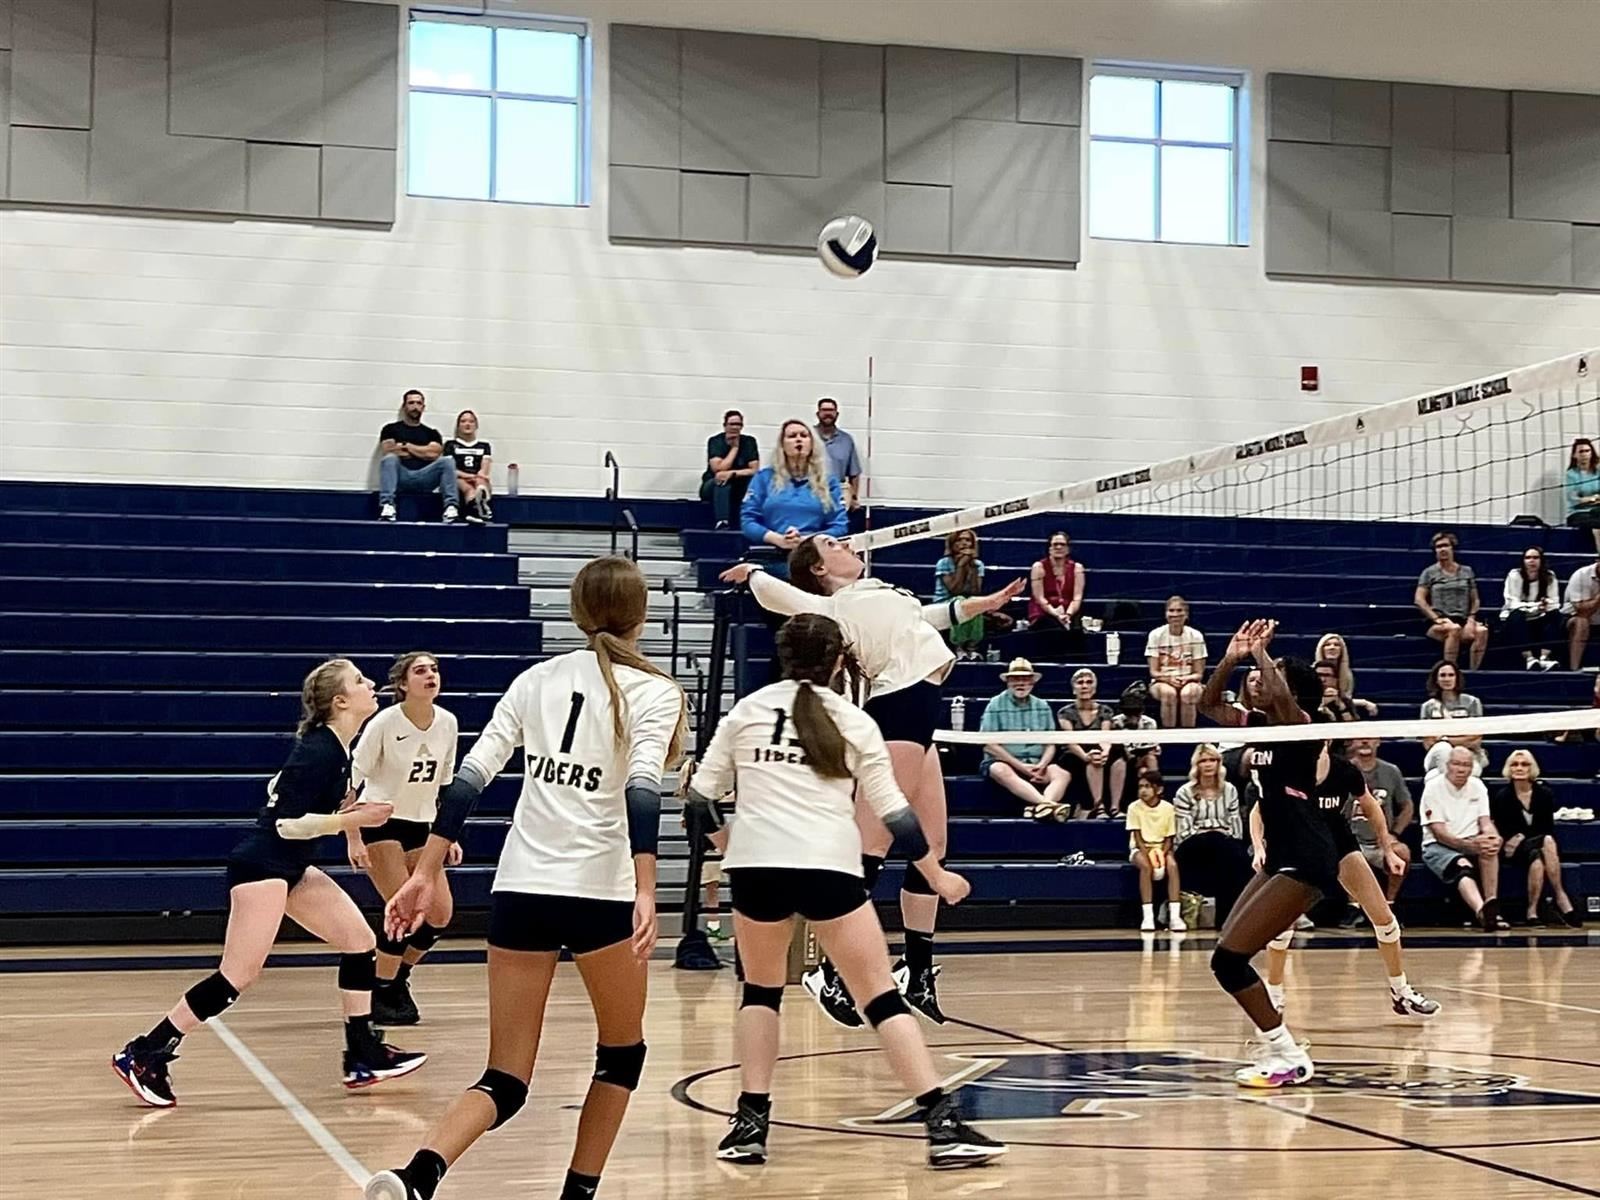  AMS girls volleyball takes aim to spike the ball